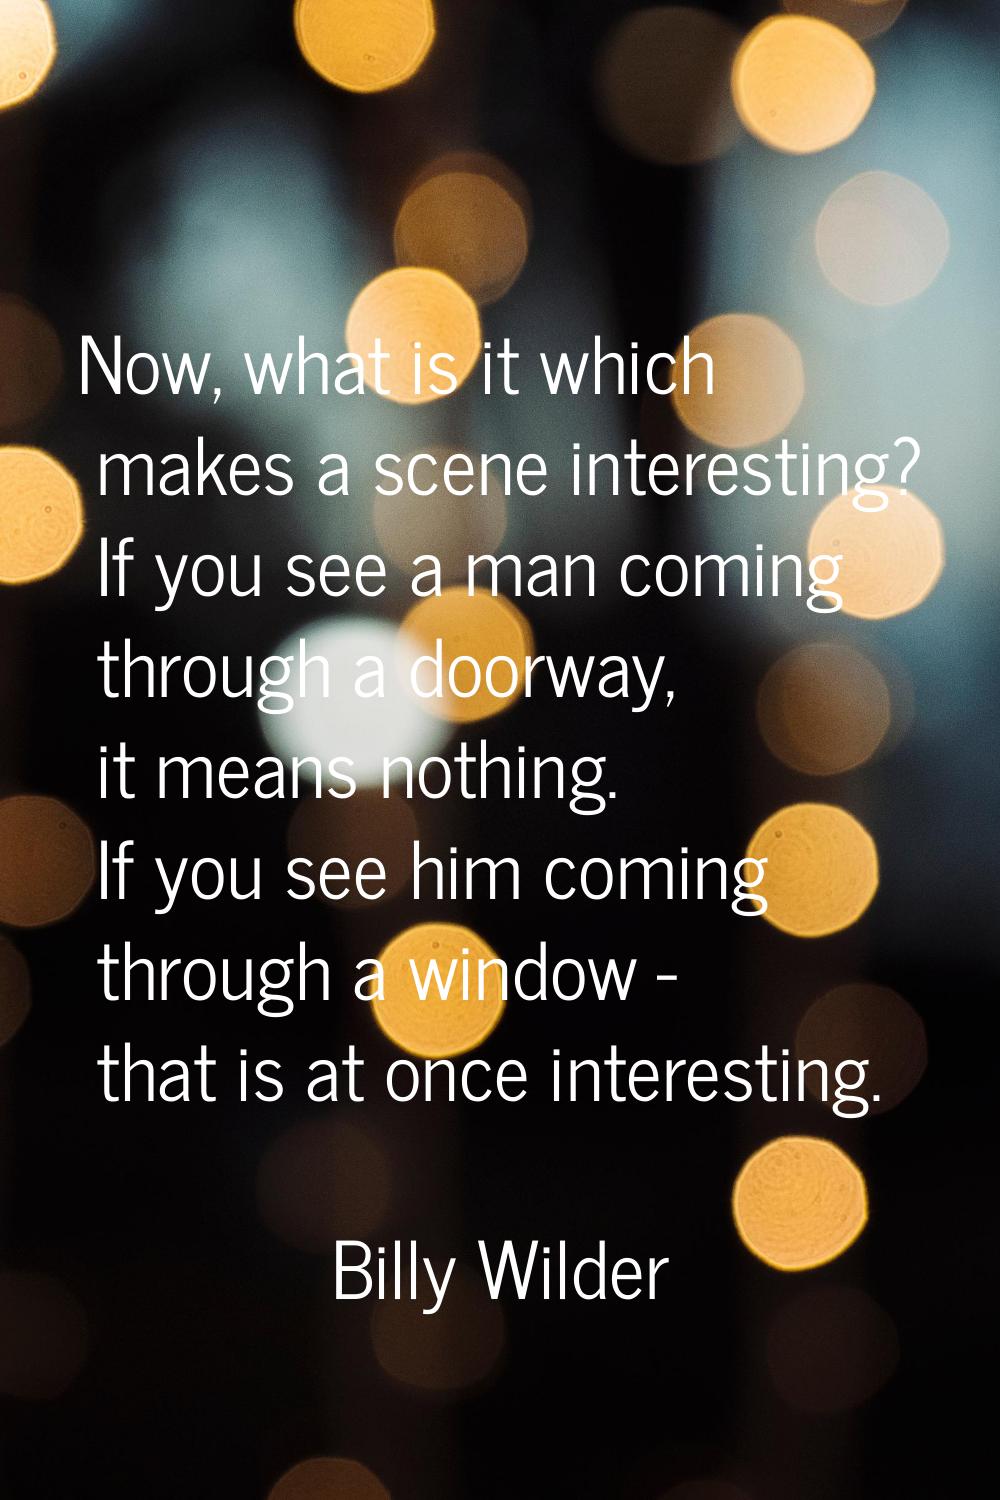 Now, what is it which makes a scene interesting? If you see a man coming through a doorway, it mean